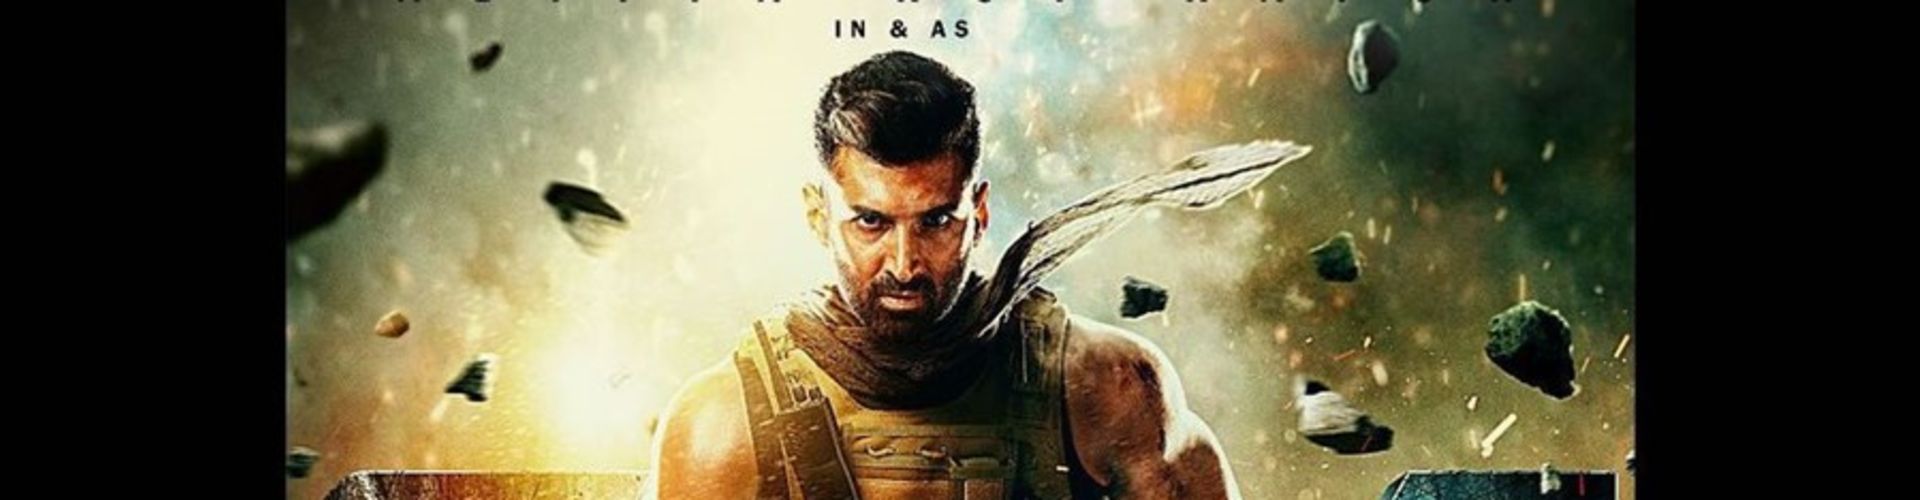 ​First Look From OM - The Battle Within is Out, Aditya Roy Kapur Looks Intense